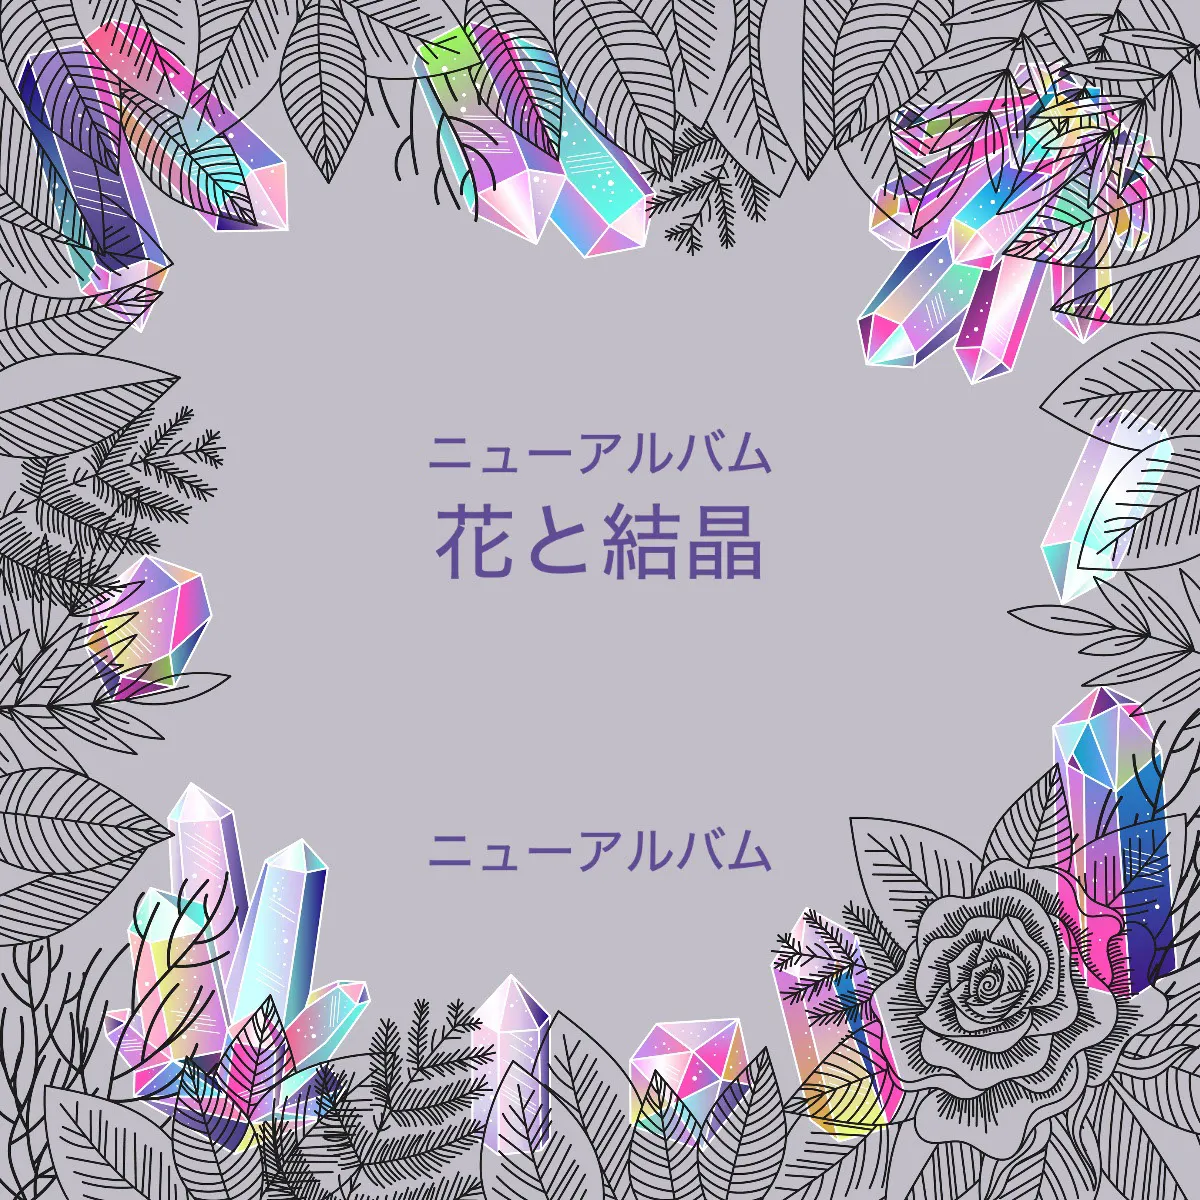 Flowers and crystal album cover